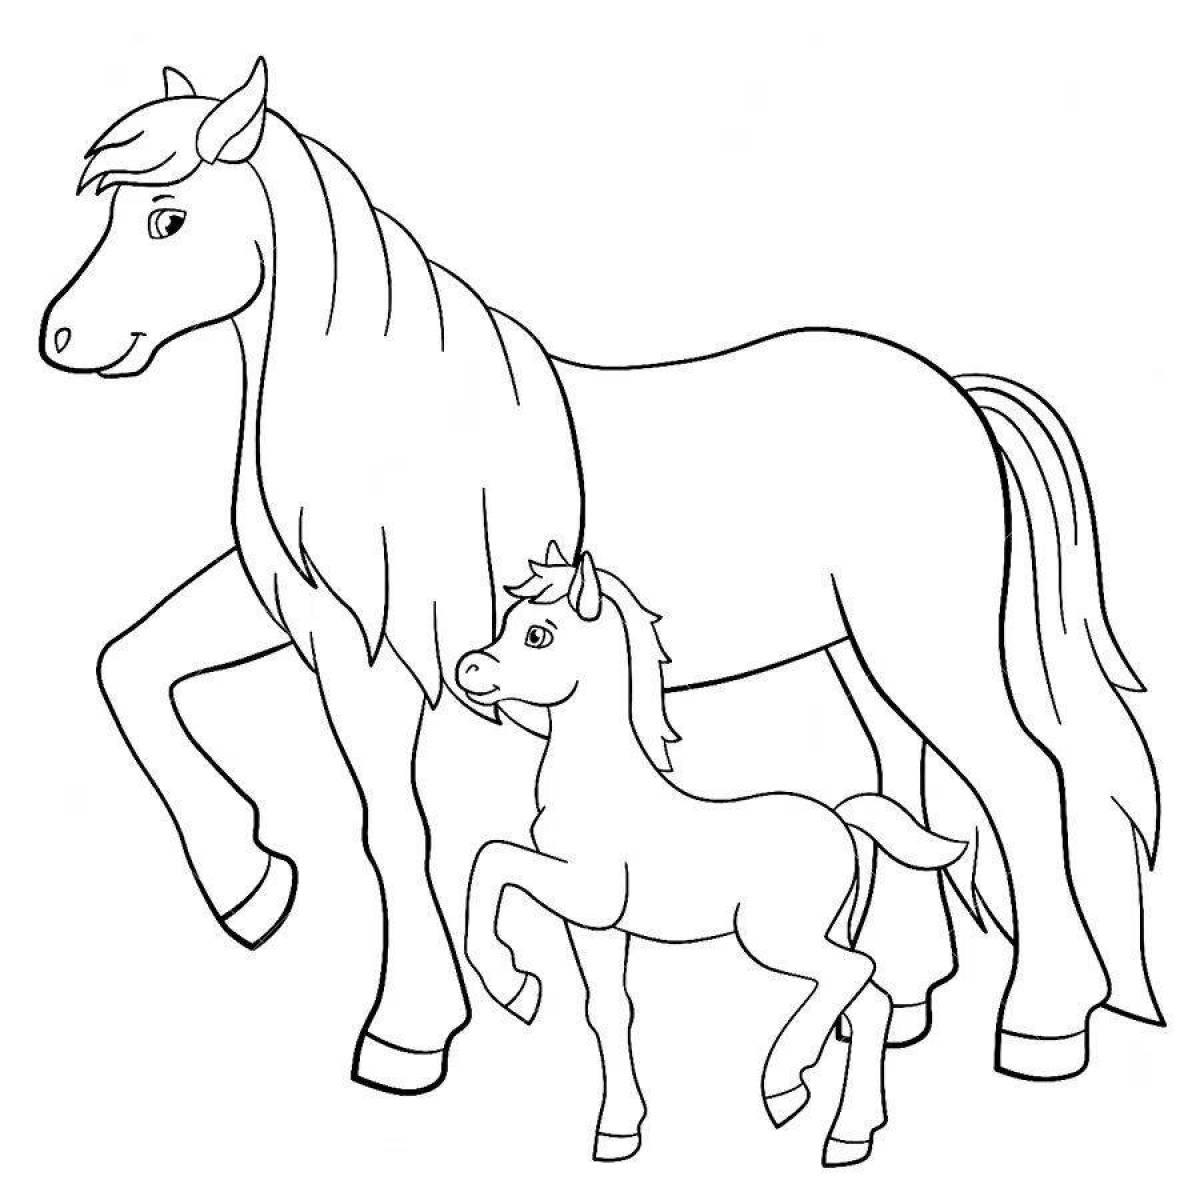 Blissful horse family coloring book